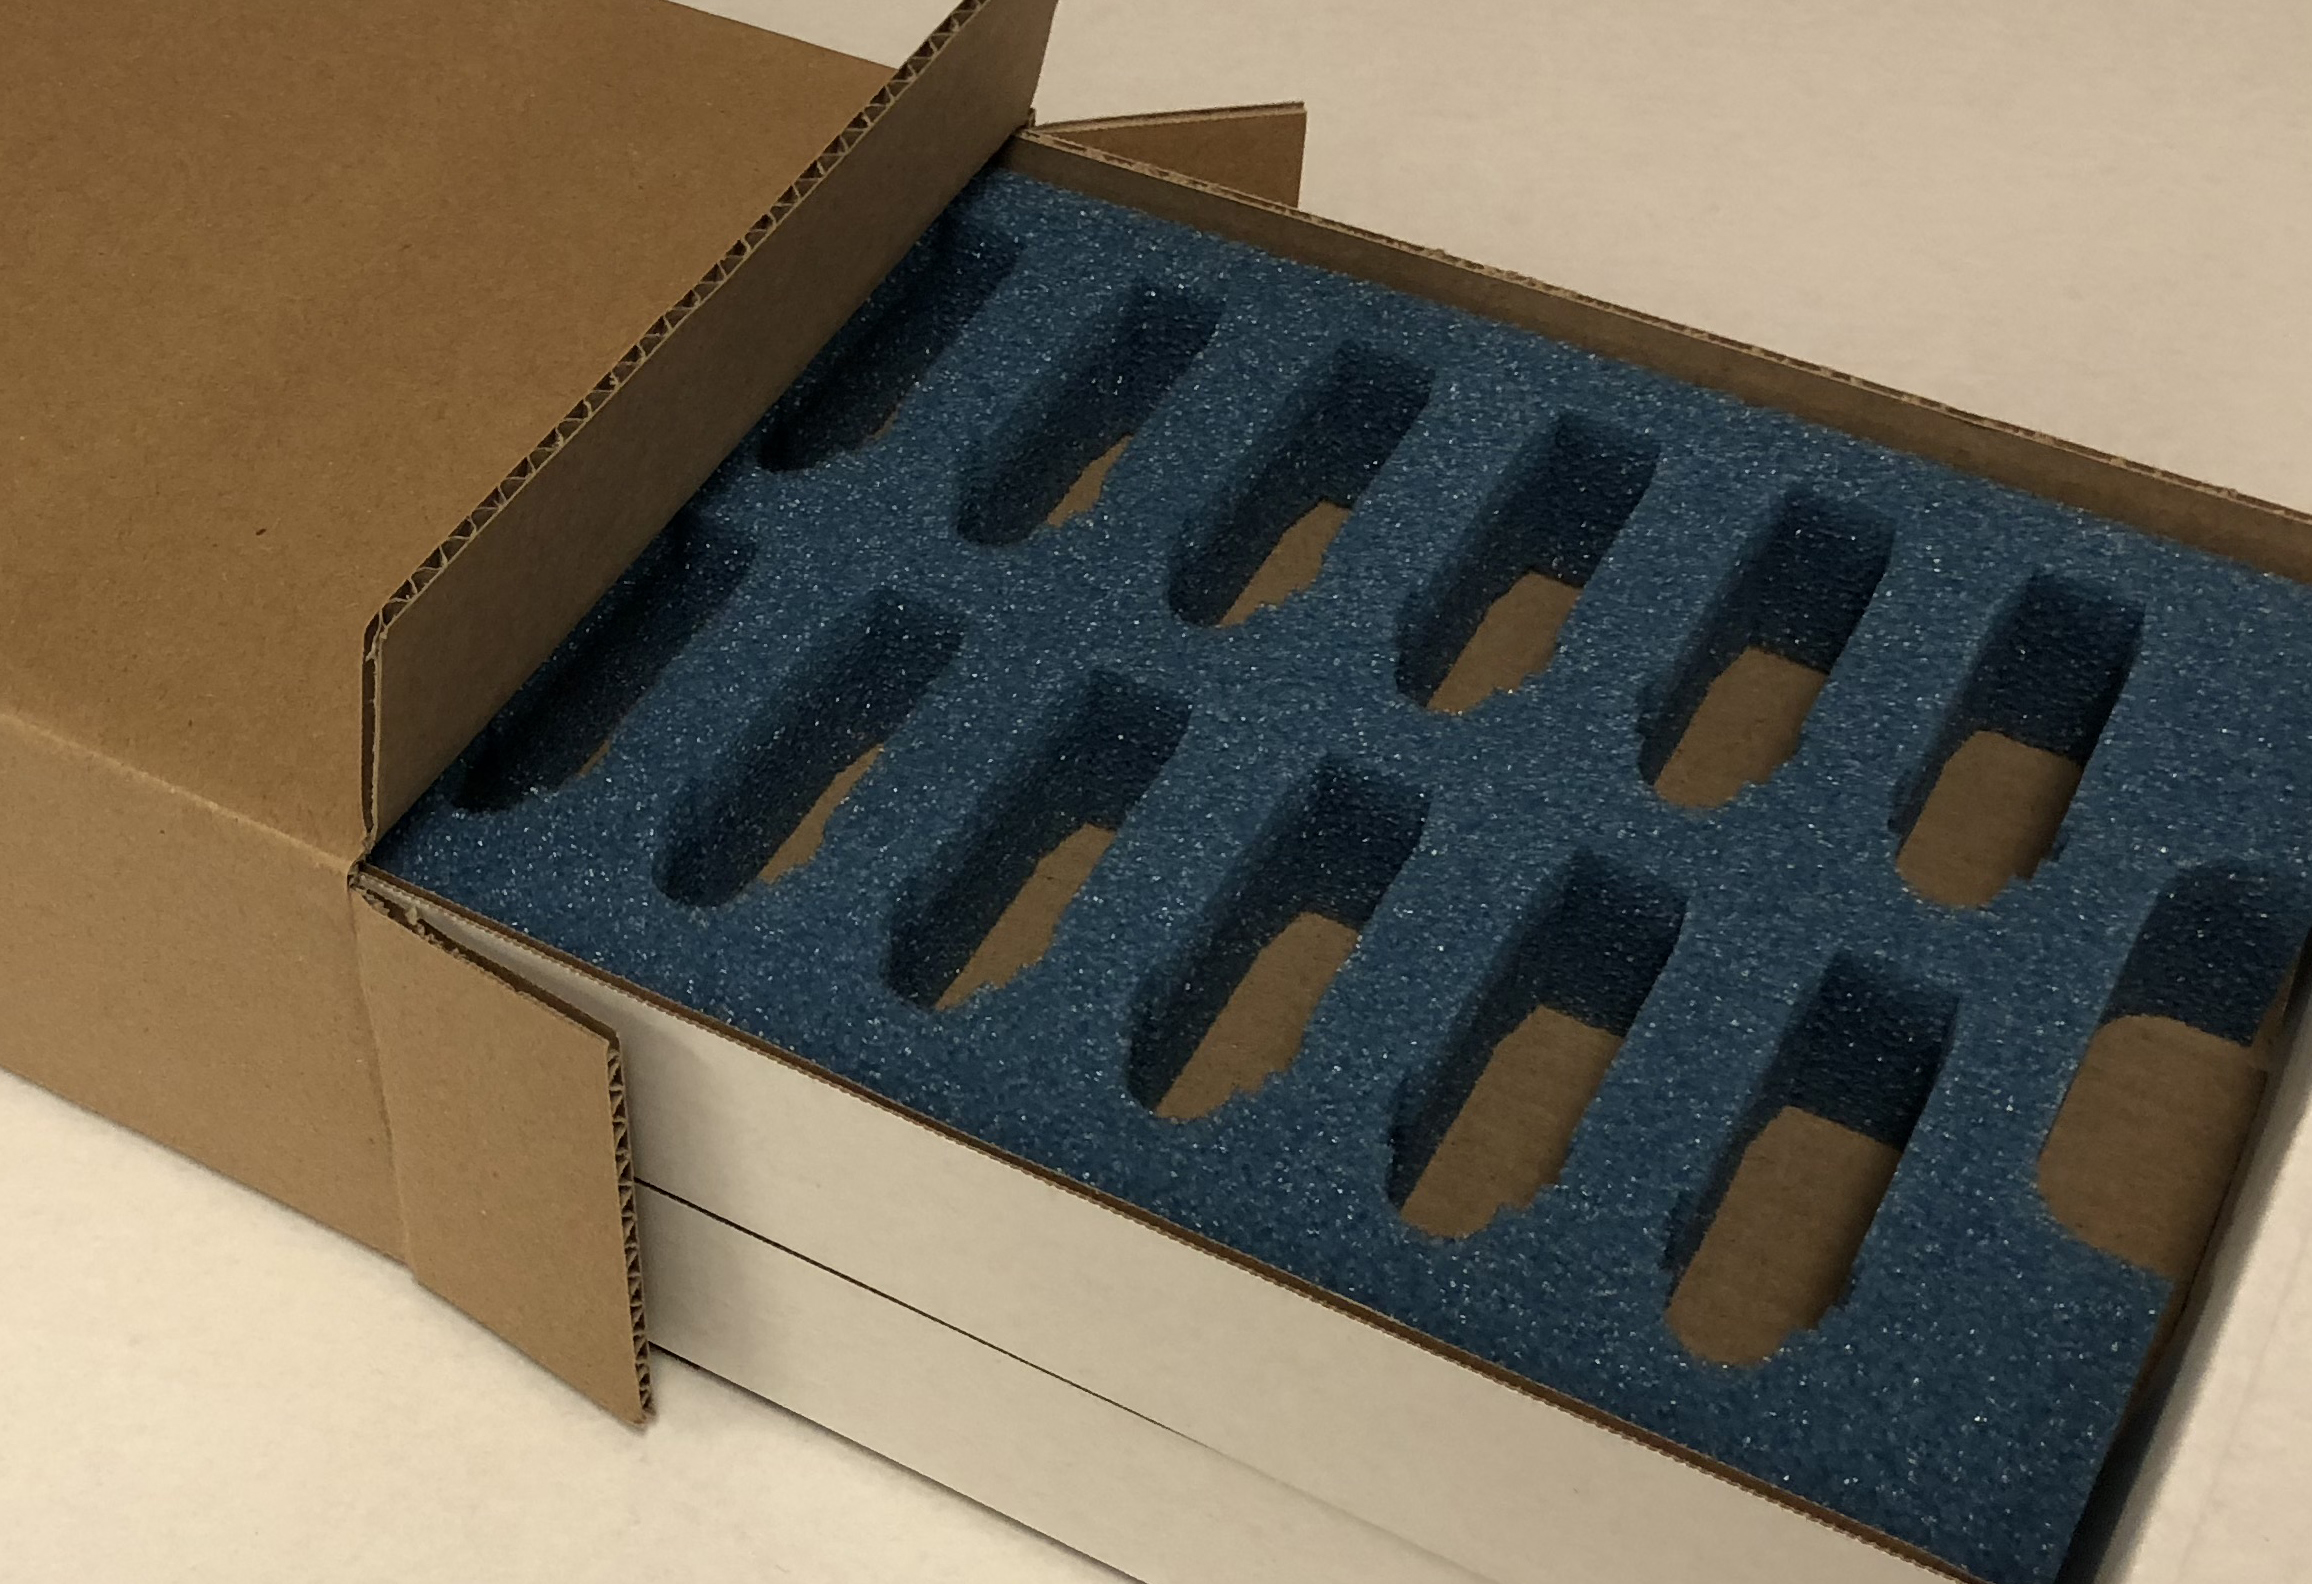 Protective Packaging Made from Foam